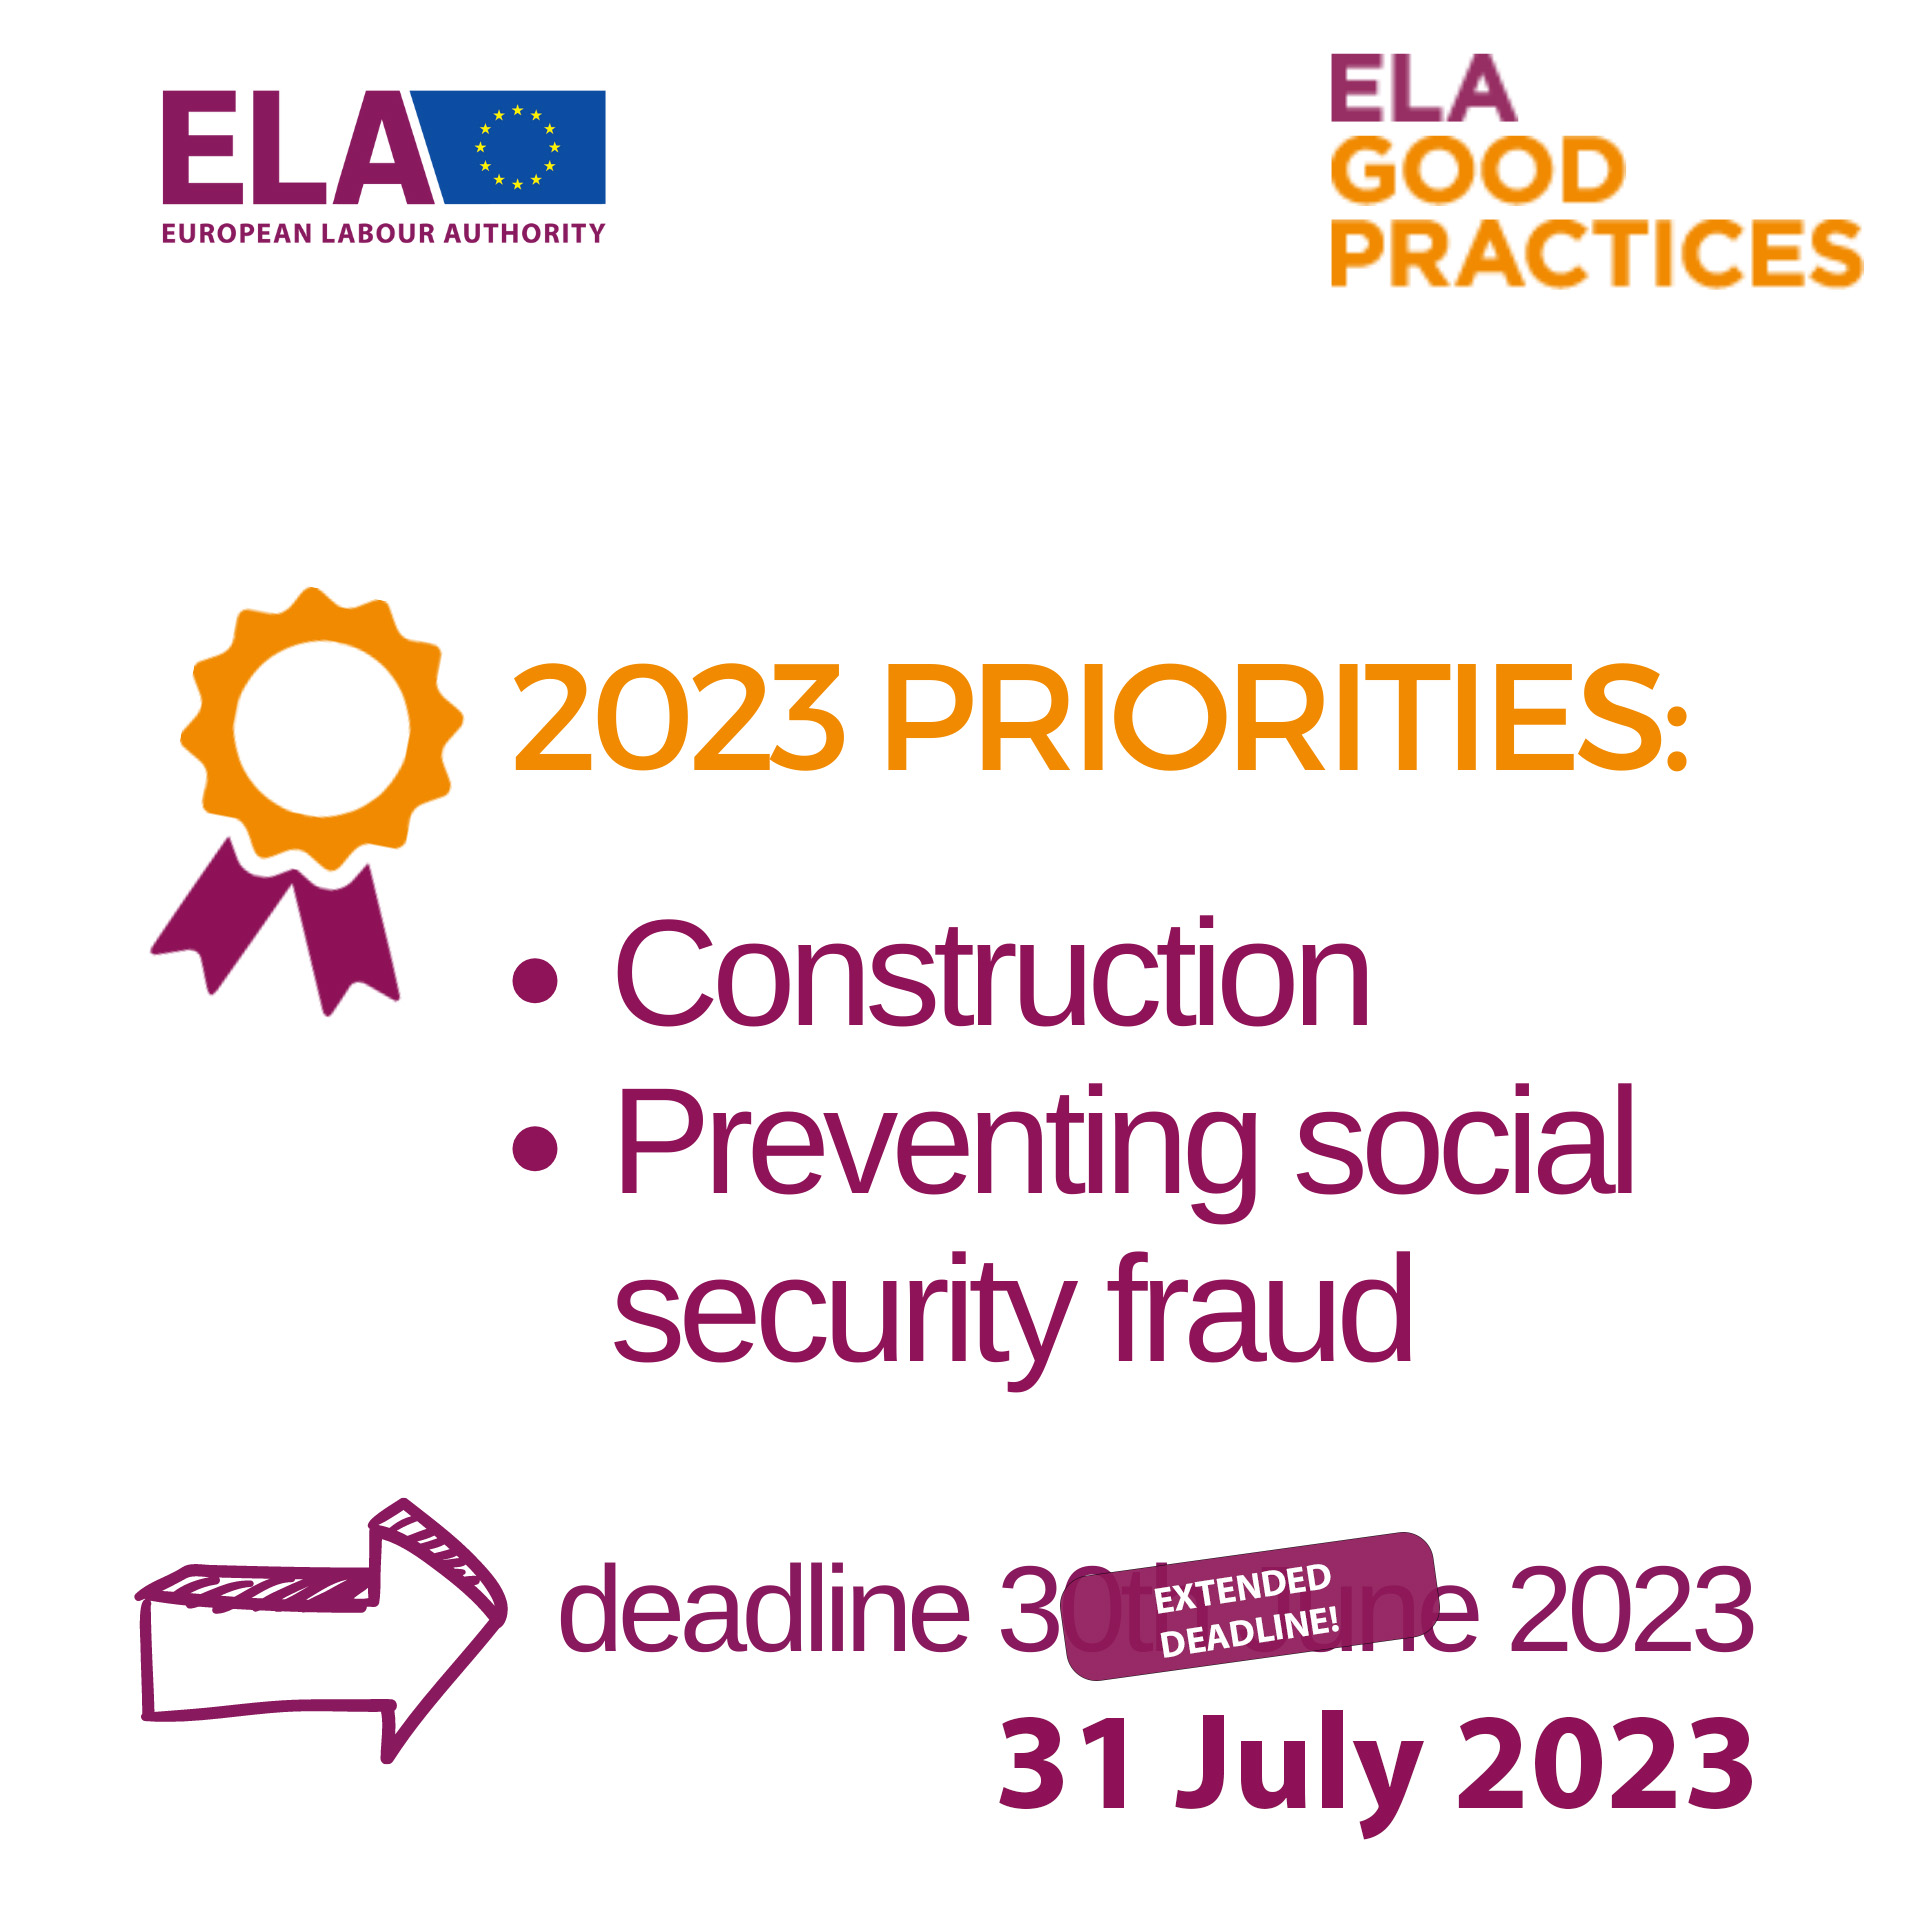 Call for good practices extended deadline